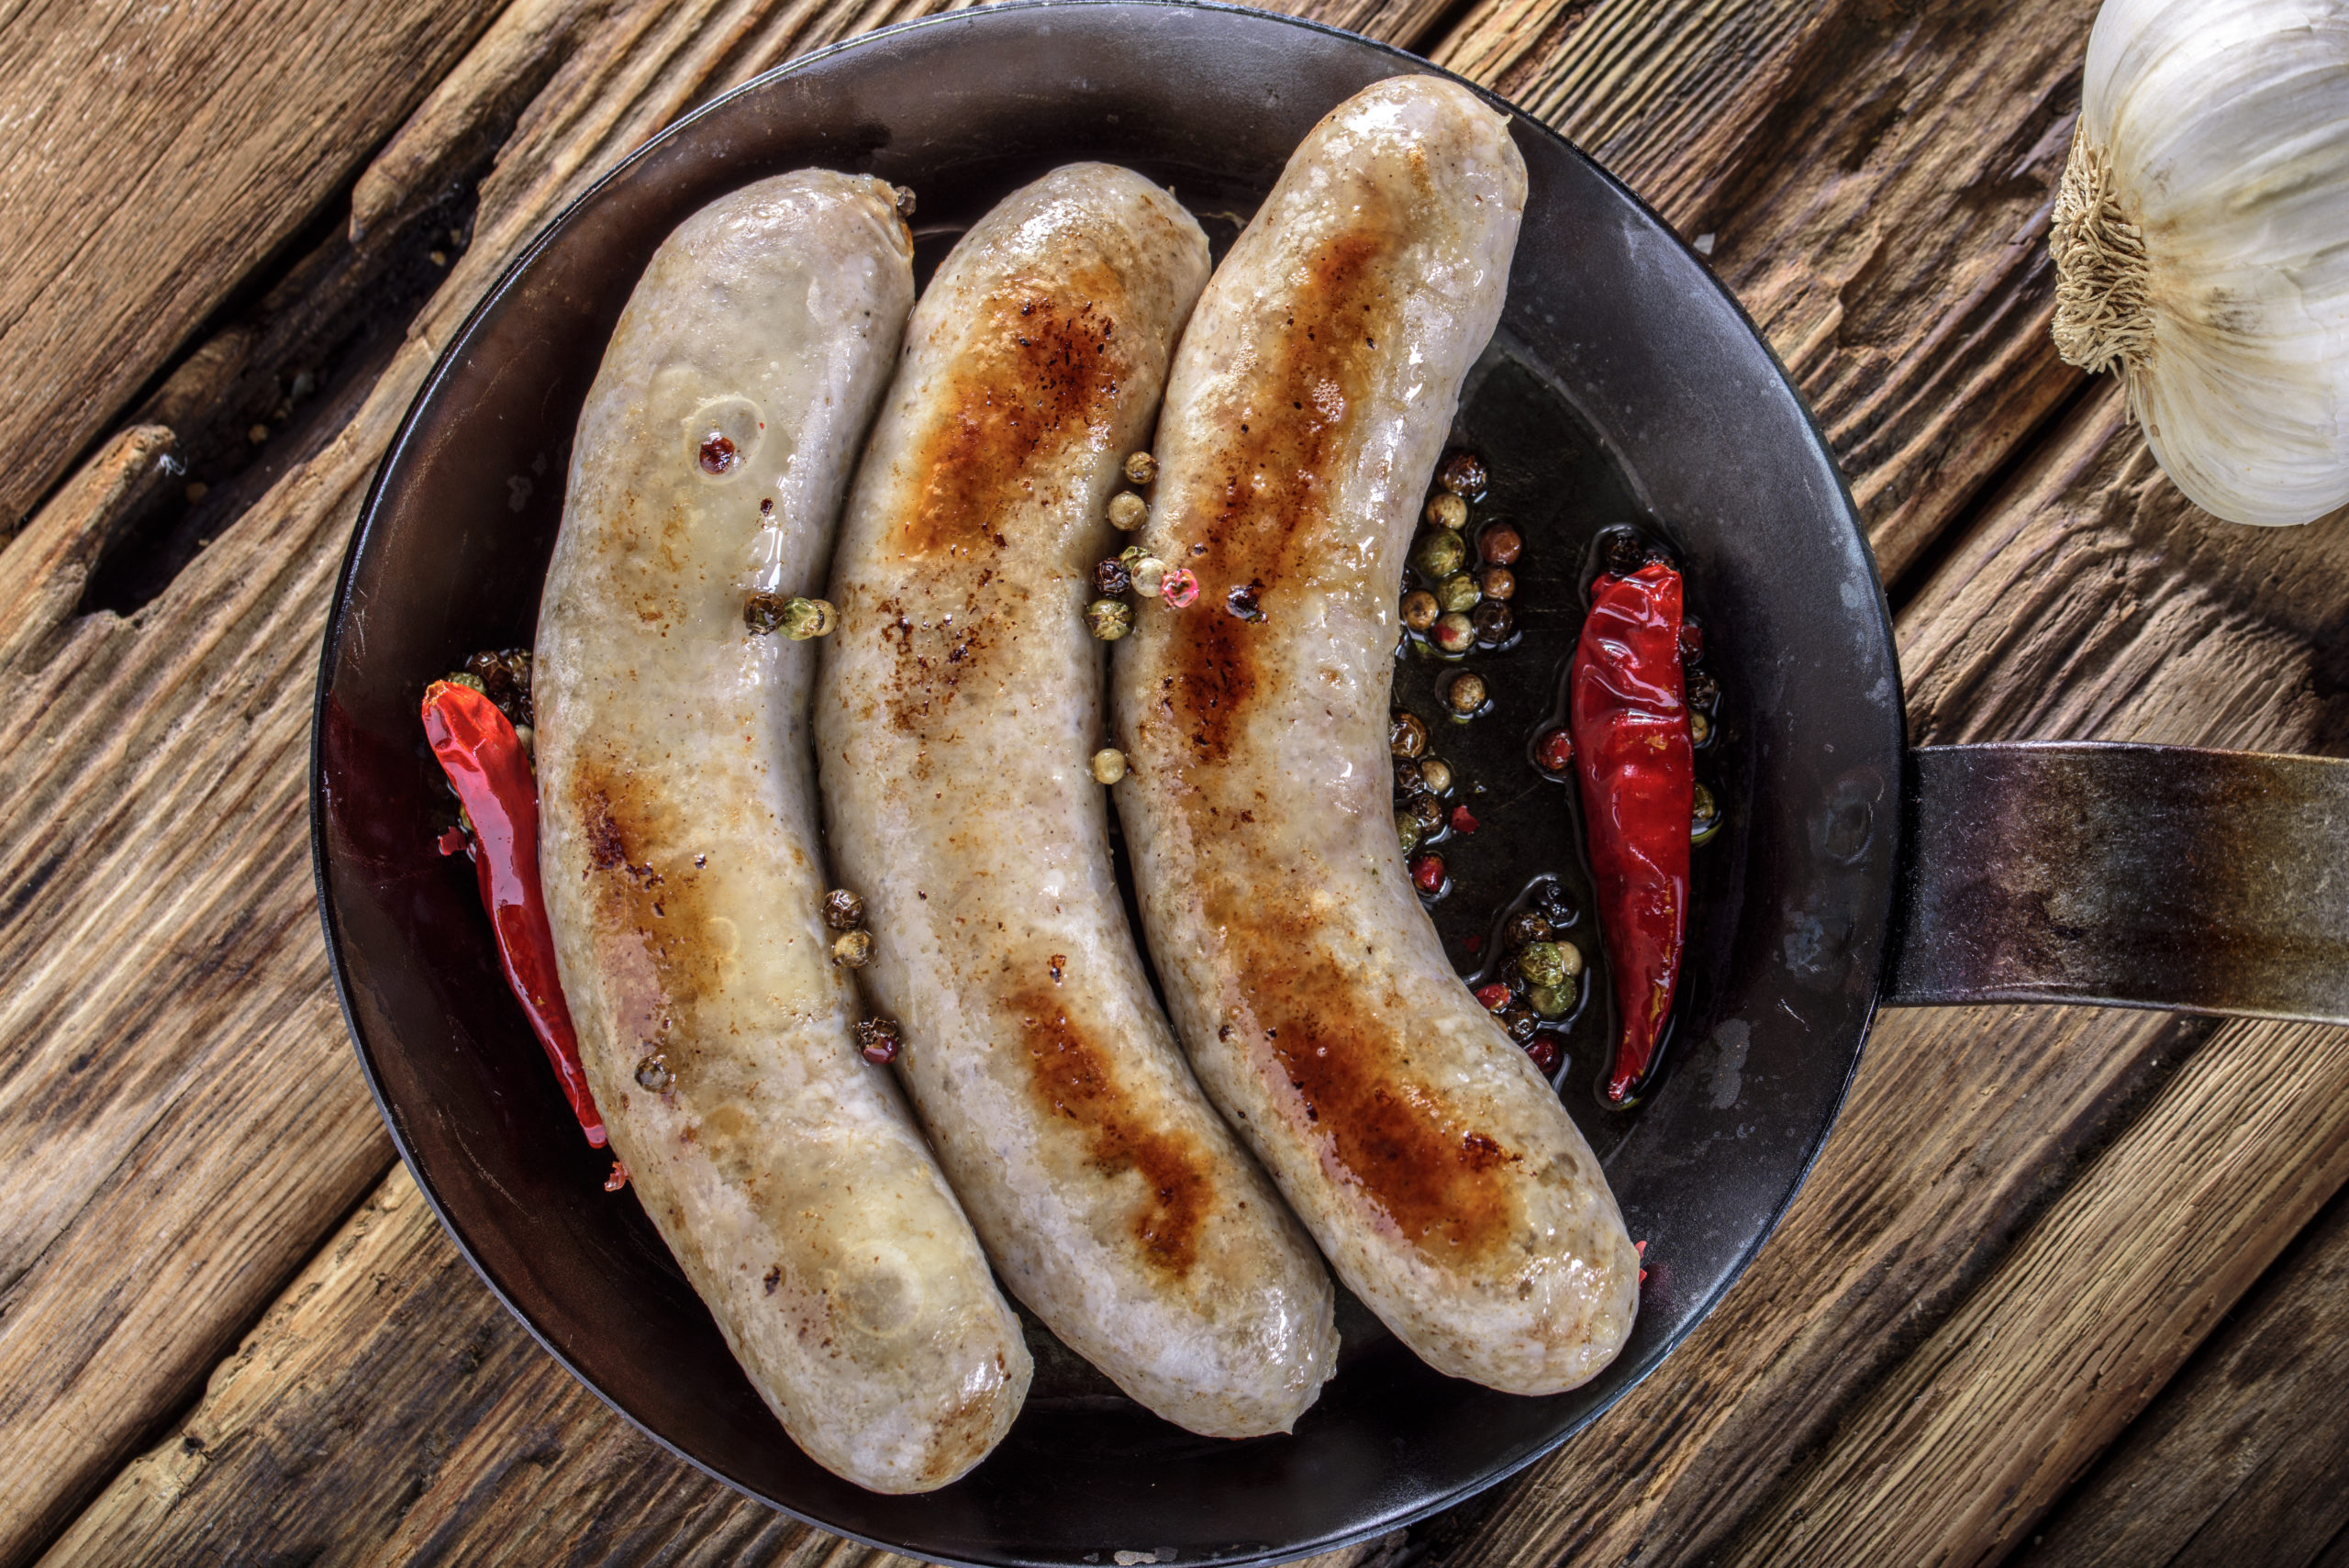 How to cook boudin